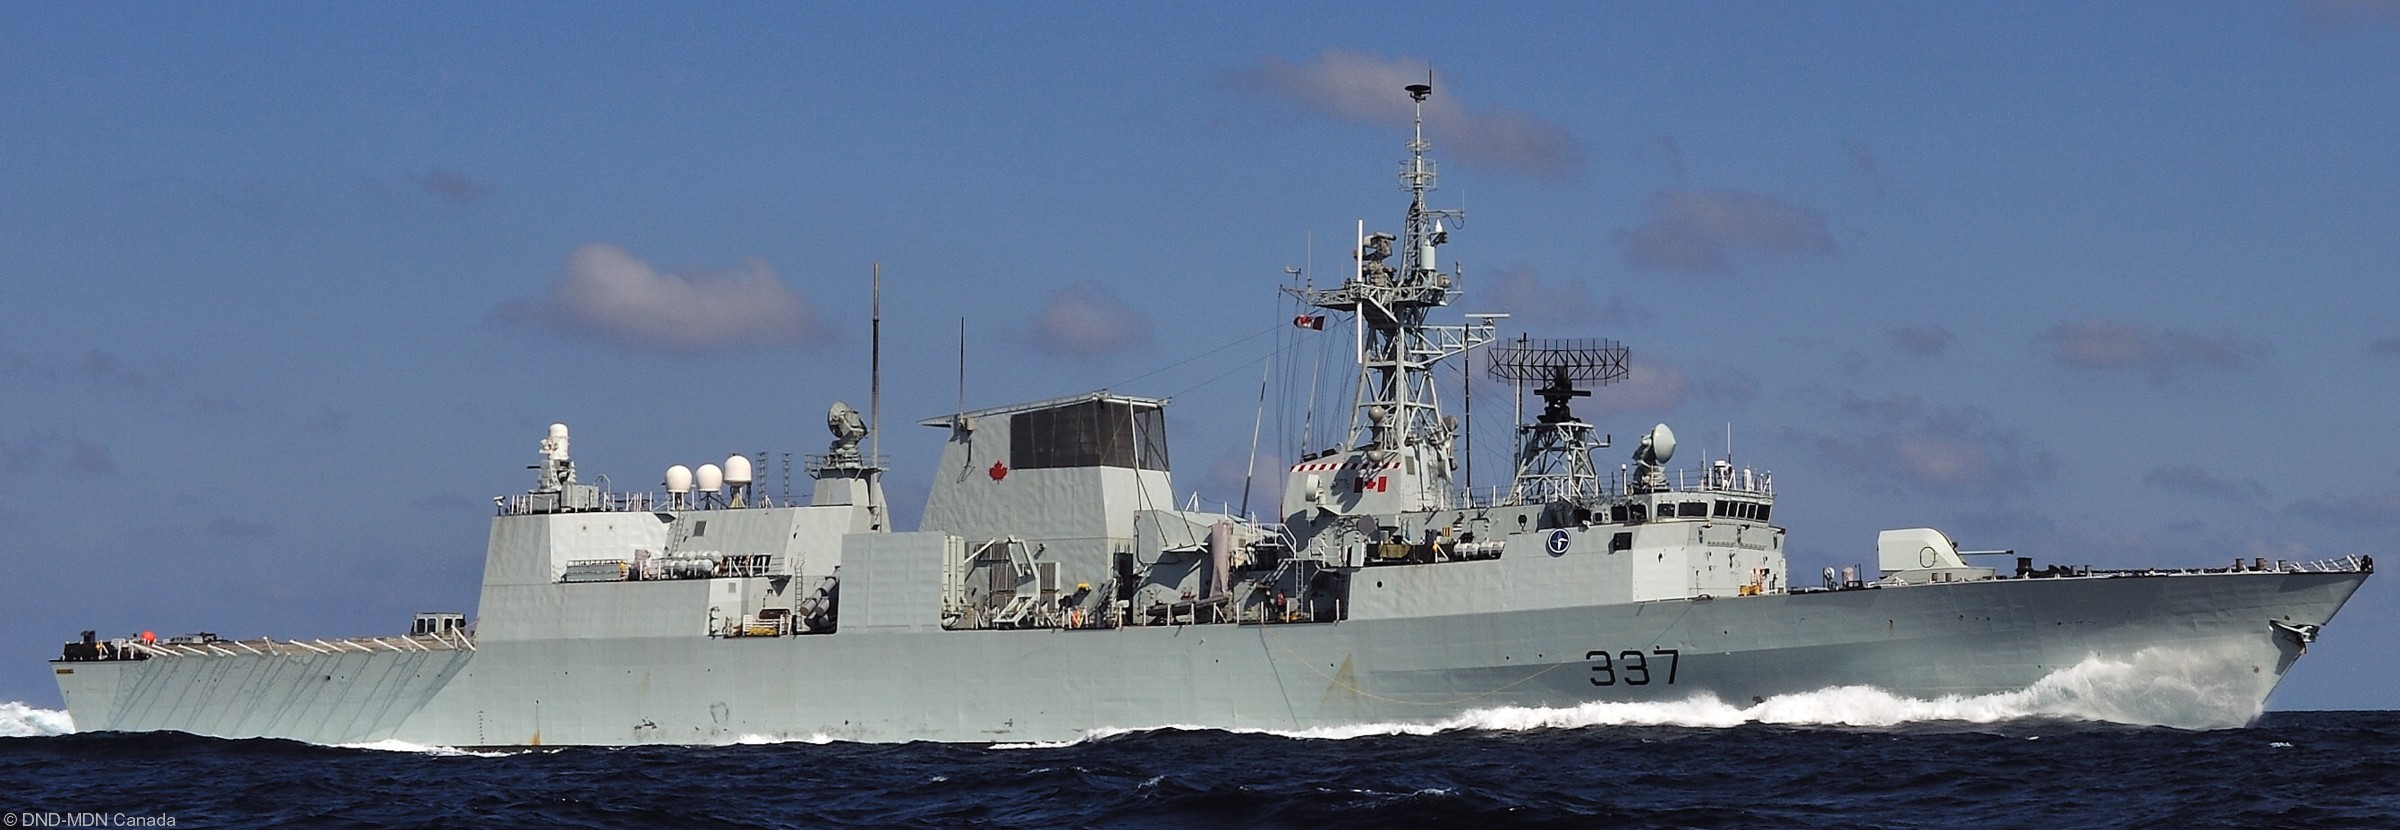 ffh-337 hmcs fredericton halifax class helicopter patrol frigate ncsm royal canadian navy 34